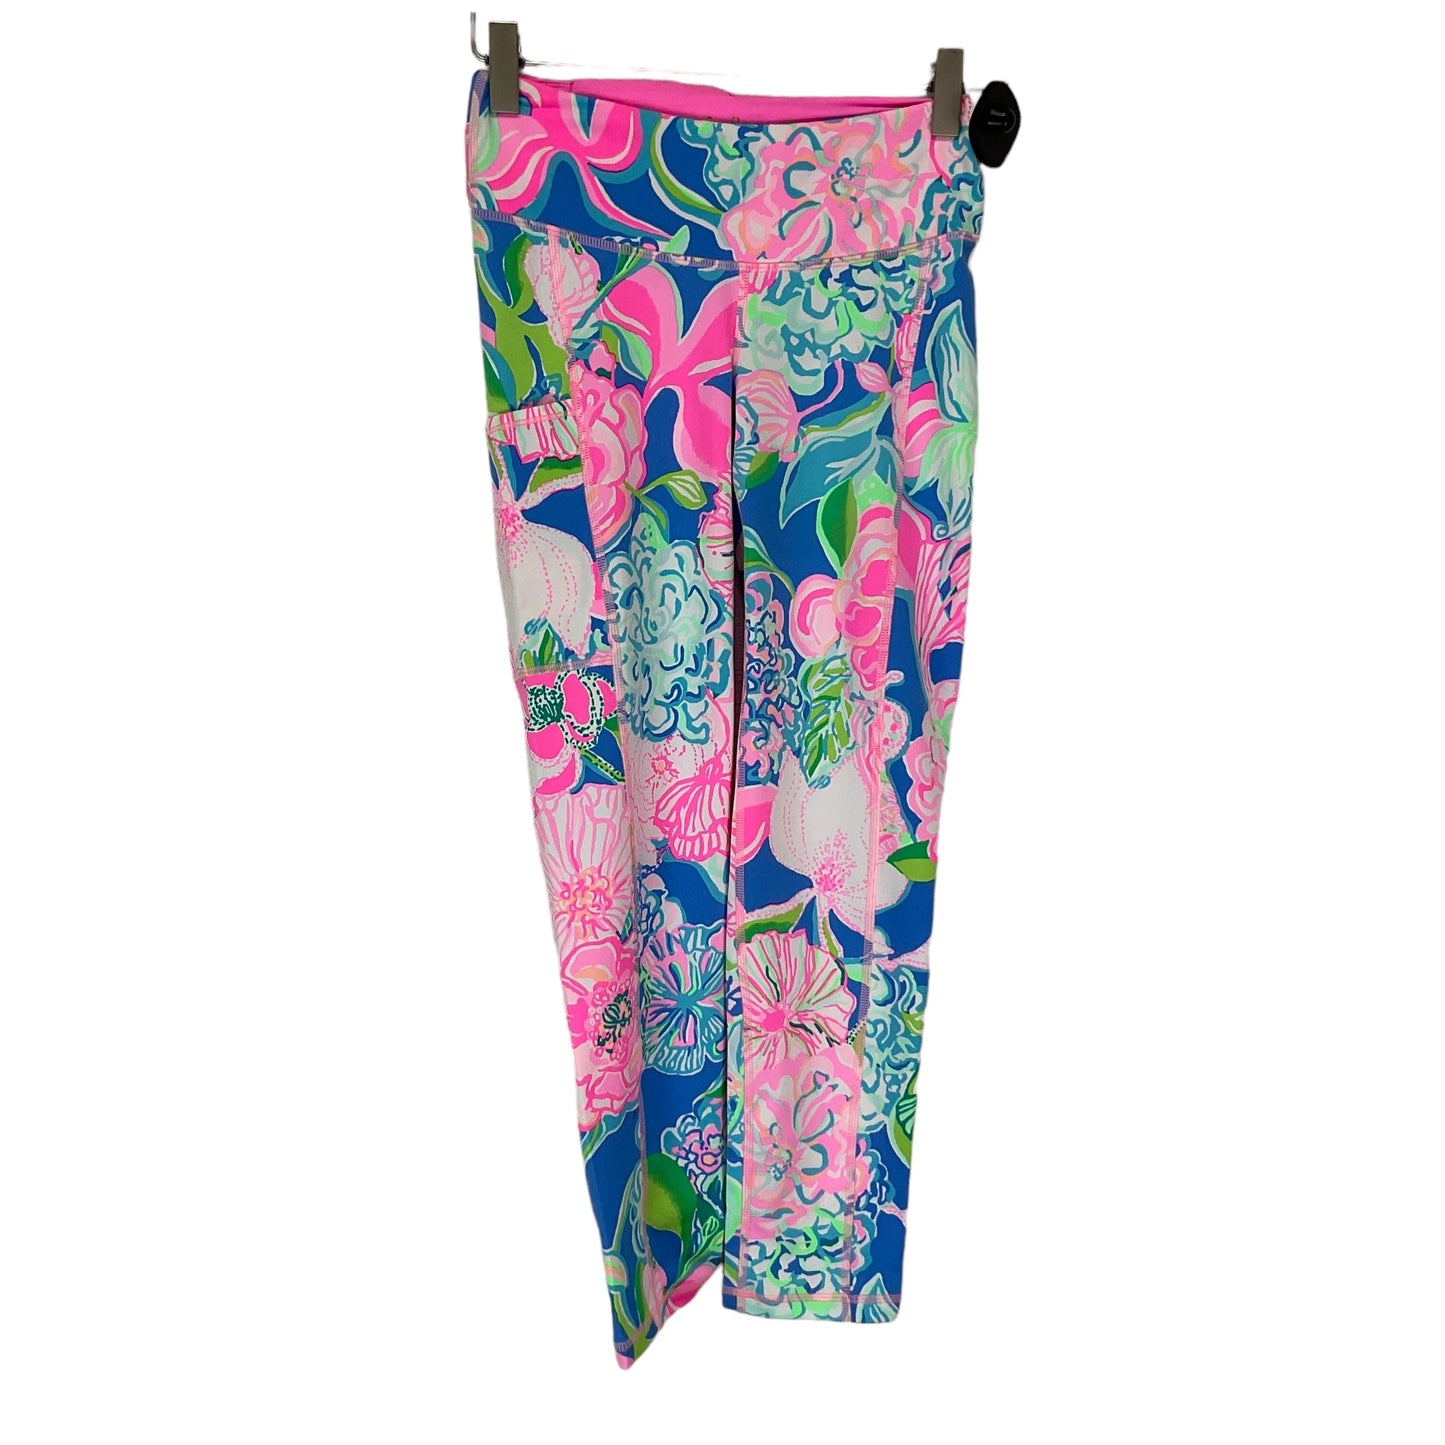 Multi-colored Pants Designer Lilly Pulitzer, Size Xs